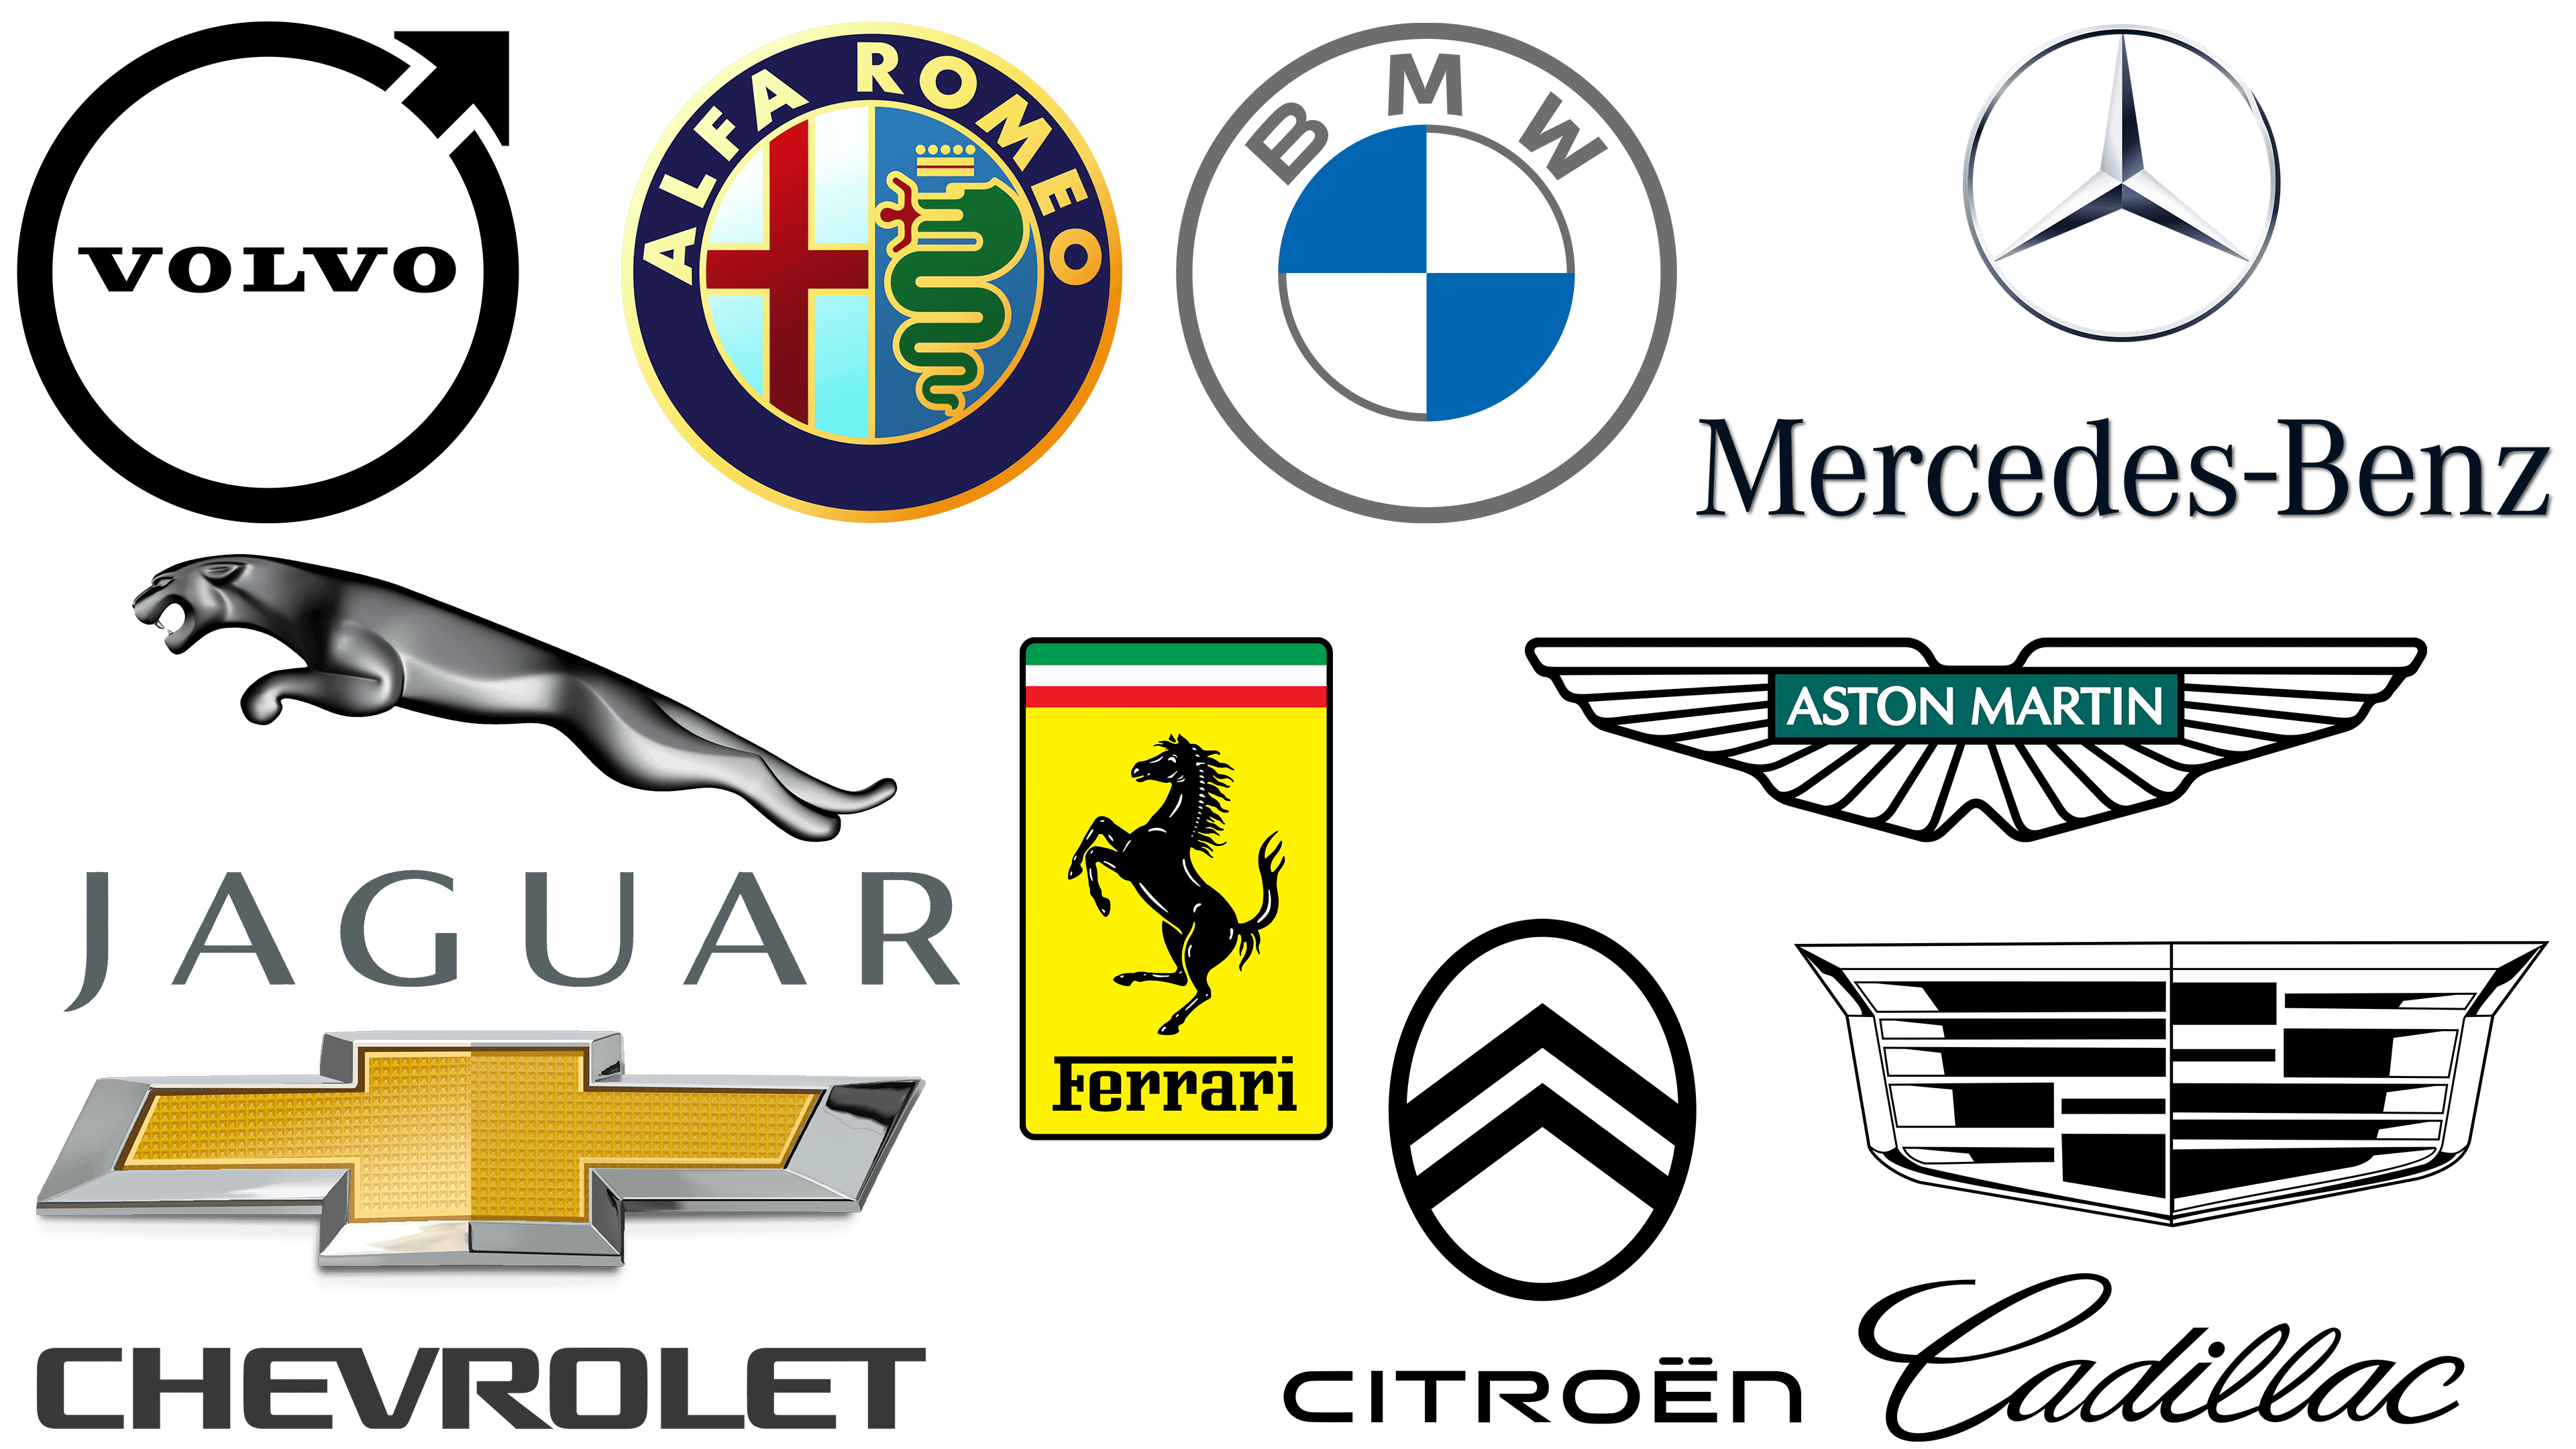 Car logo redesigns: the good, the bad and the ugly | Creative Bloq